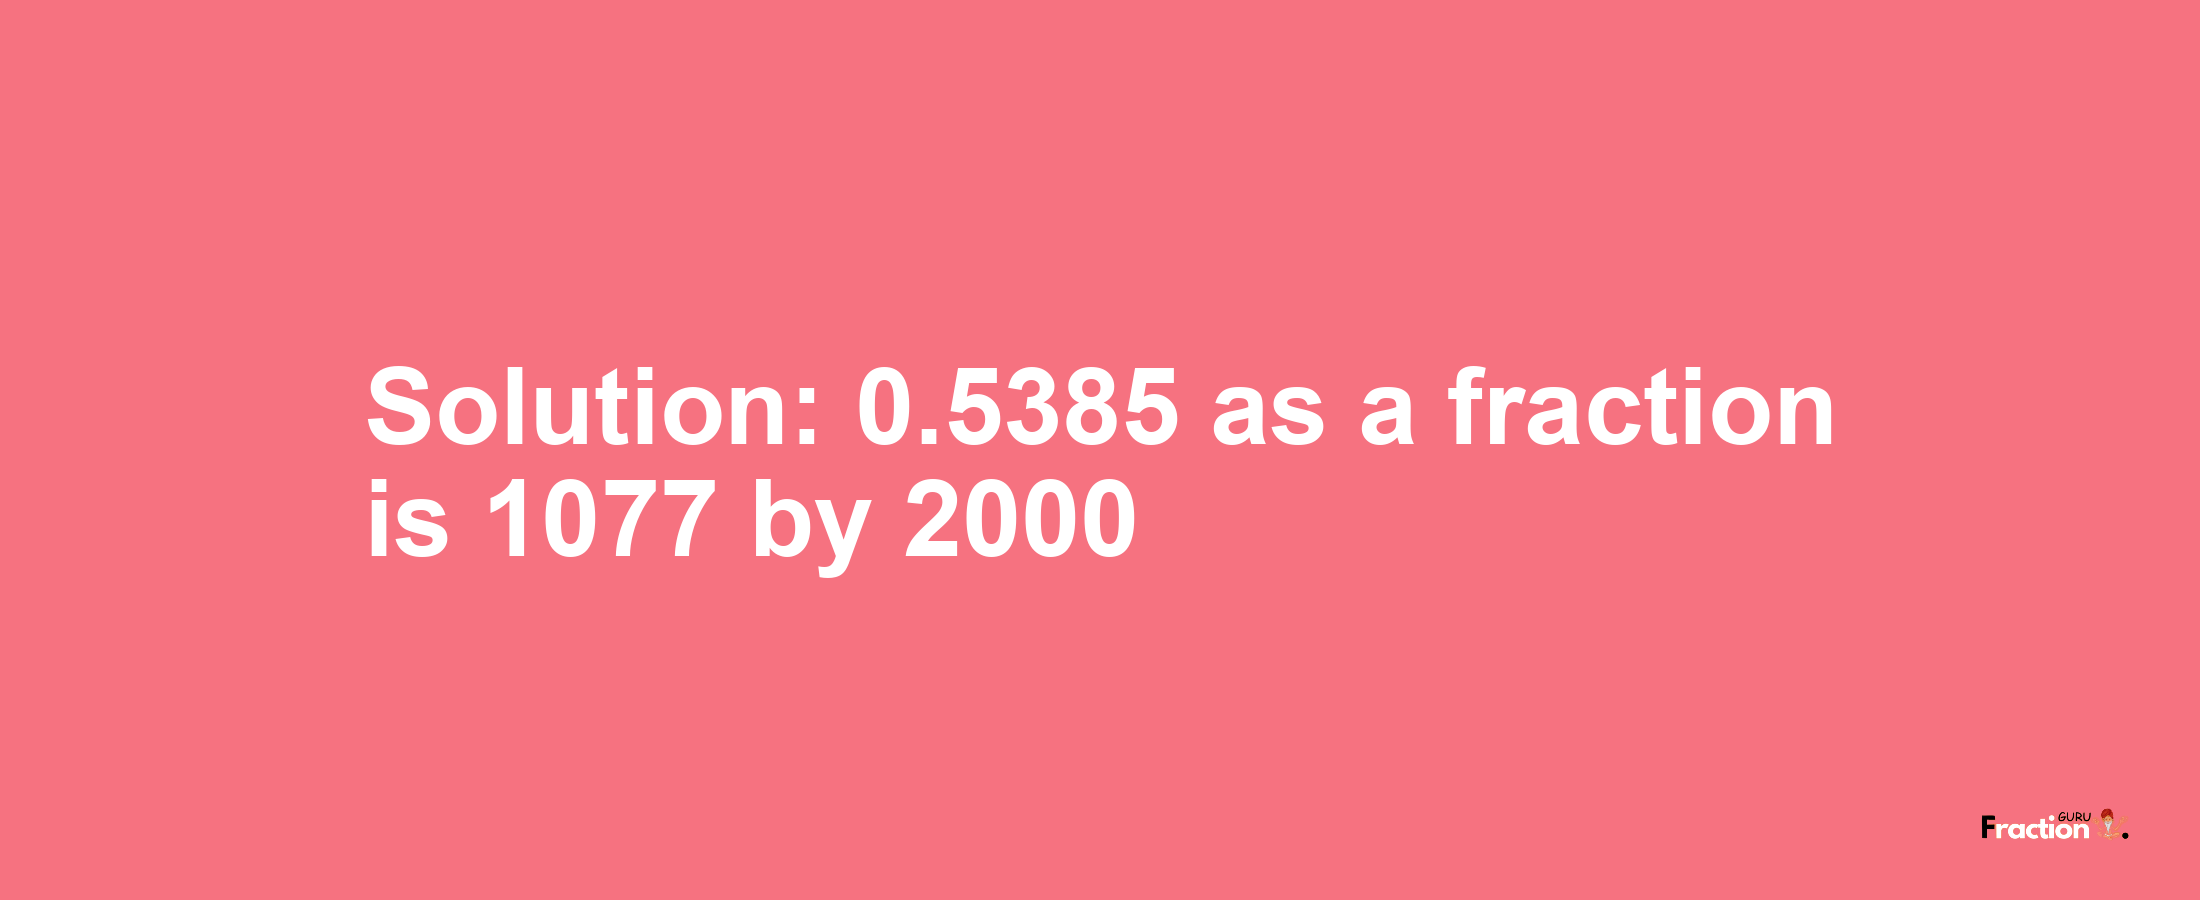 Solution:0.5385 as a fraction is 1077/2000